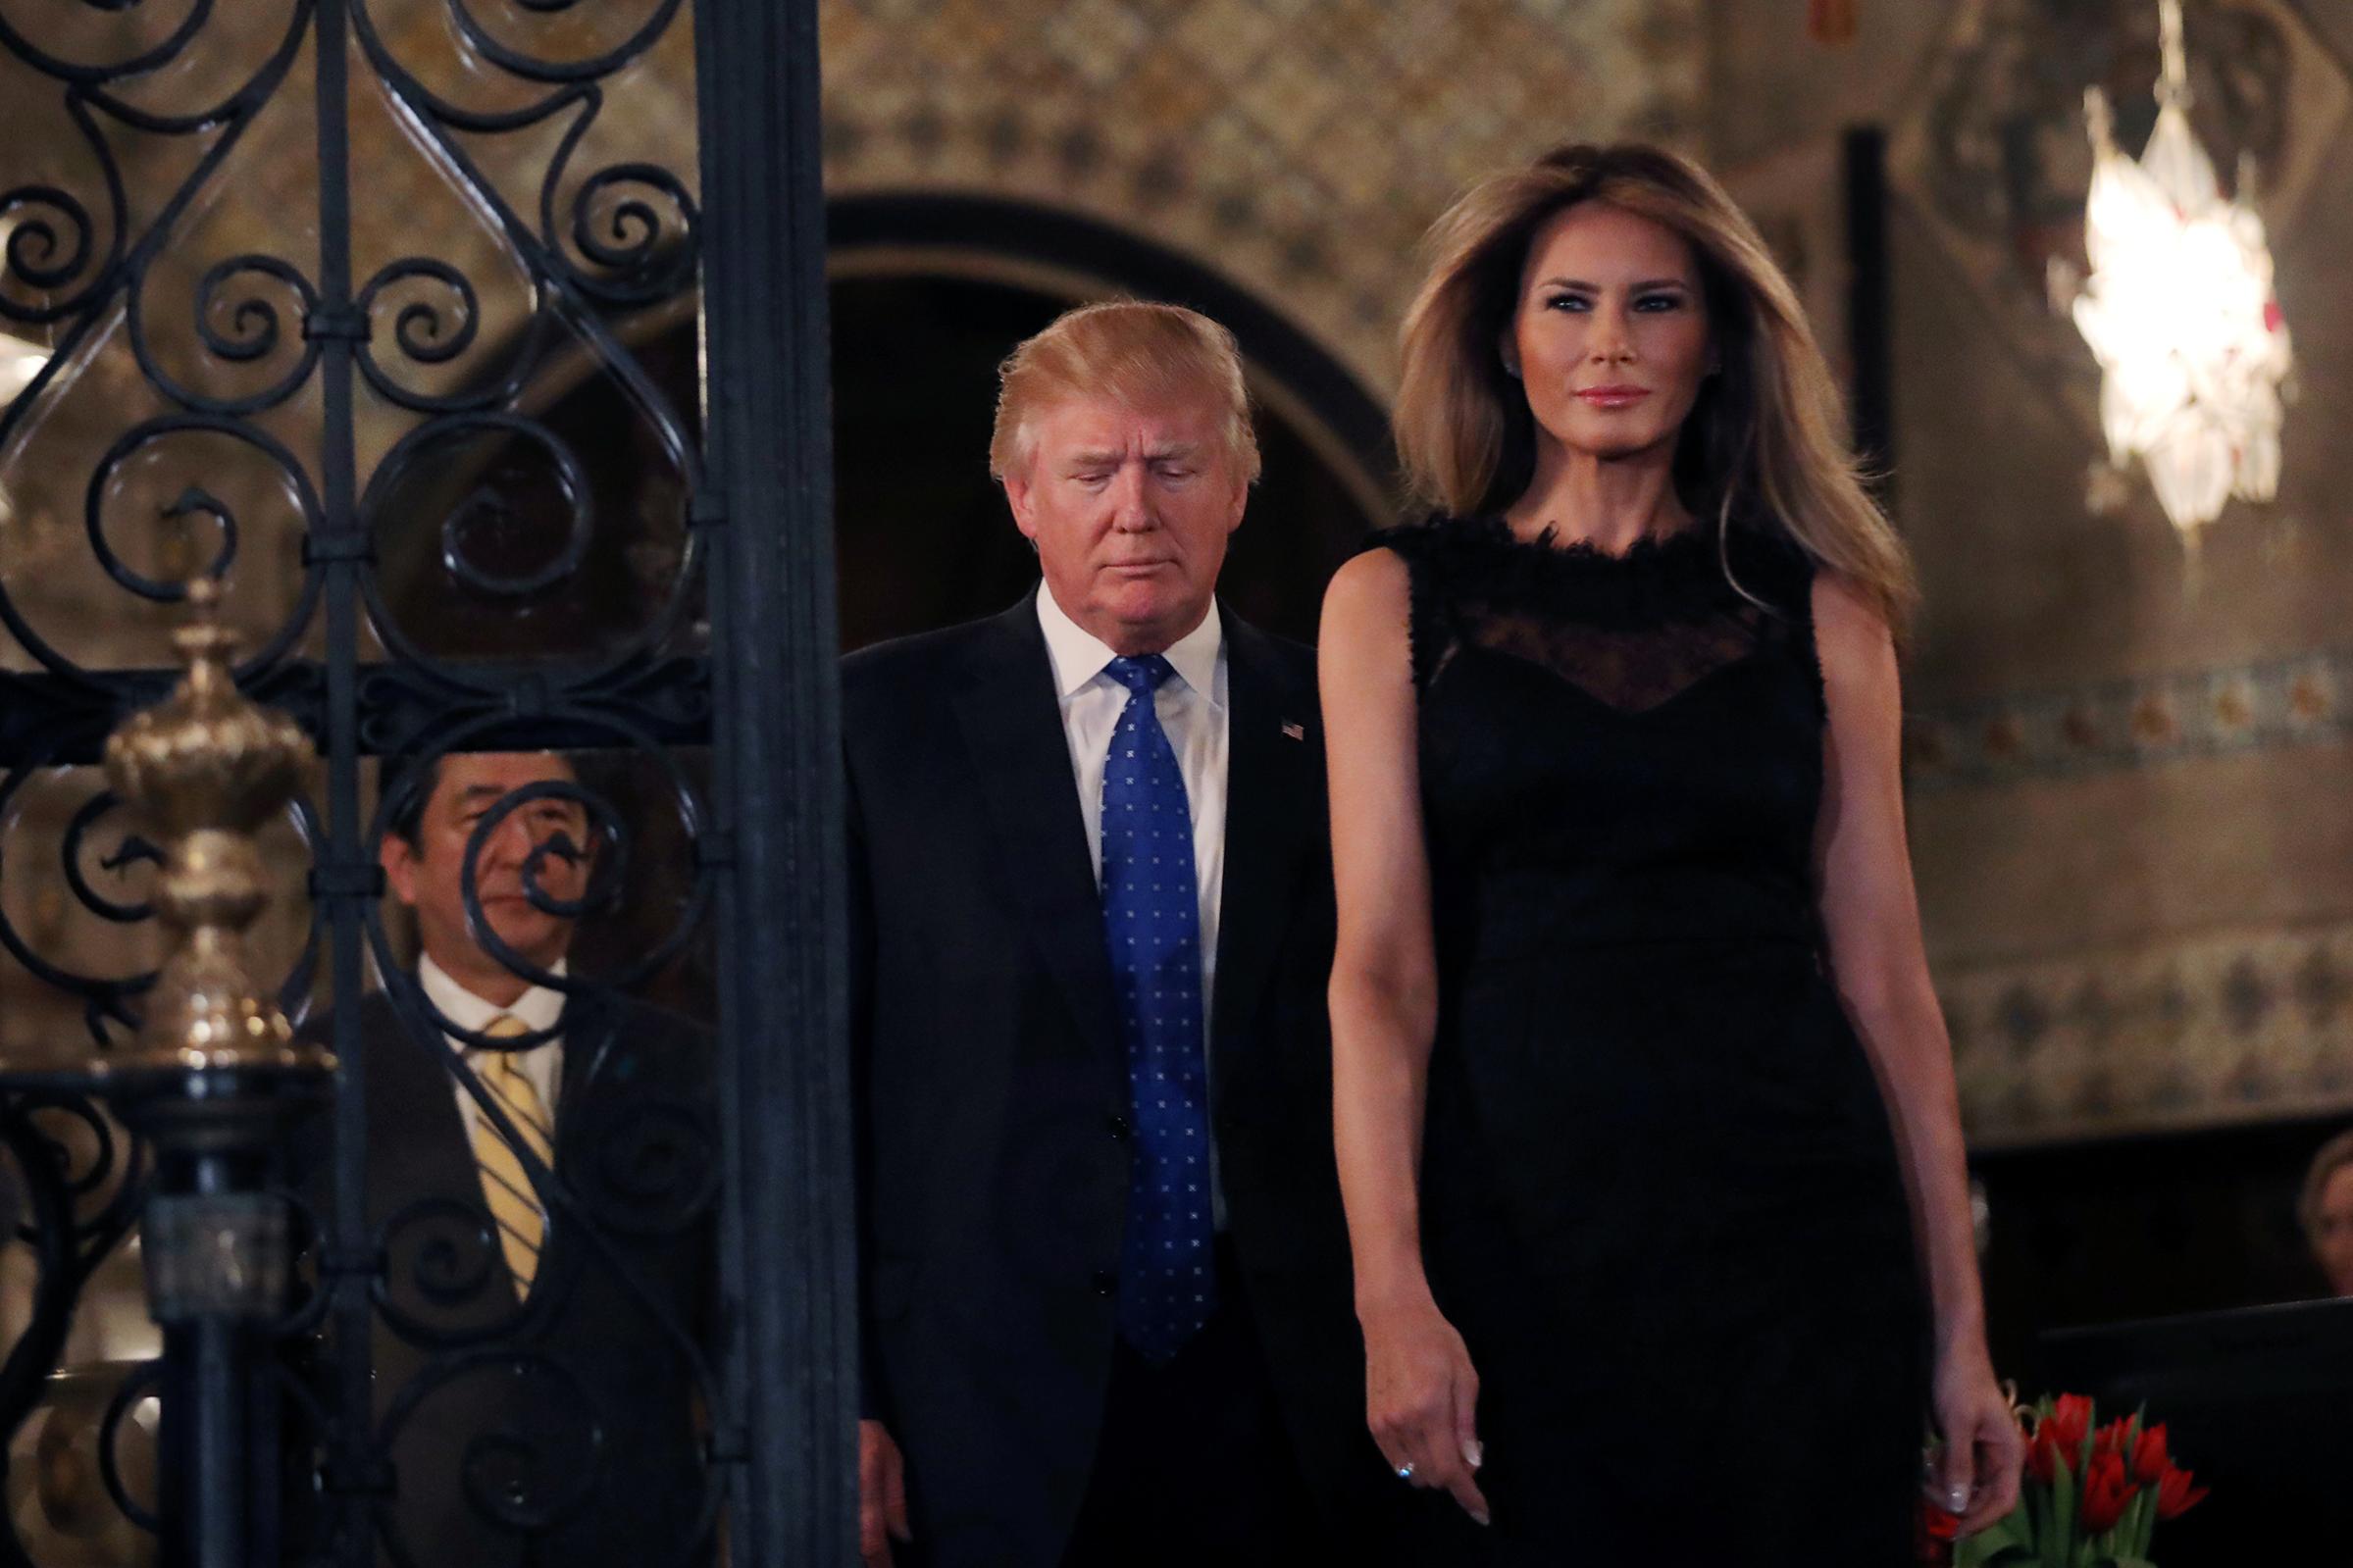 President Donald Trump with First Lady Melania wearing a sleeveless black dress with a low-dipping back and a layer of lace on top, walk to pose for a photograph with Japanese Prime Minister Shinzo Abe before attending dinner at Mar-a-Lago Club in Palm Beach, Fla., Feb. 11, 2017. a photograph before attending dinner at Mar-a-Lago Club in Palm Beach, Florida, U.S.